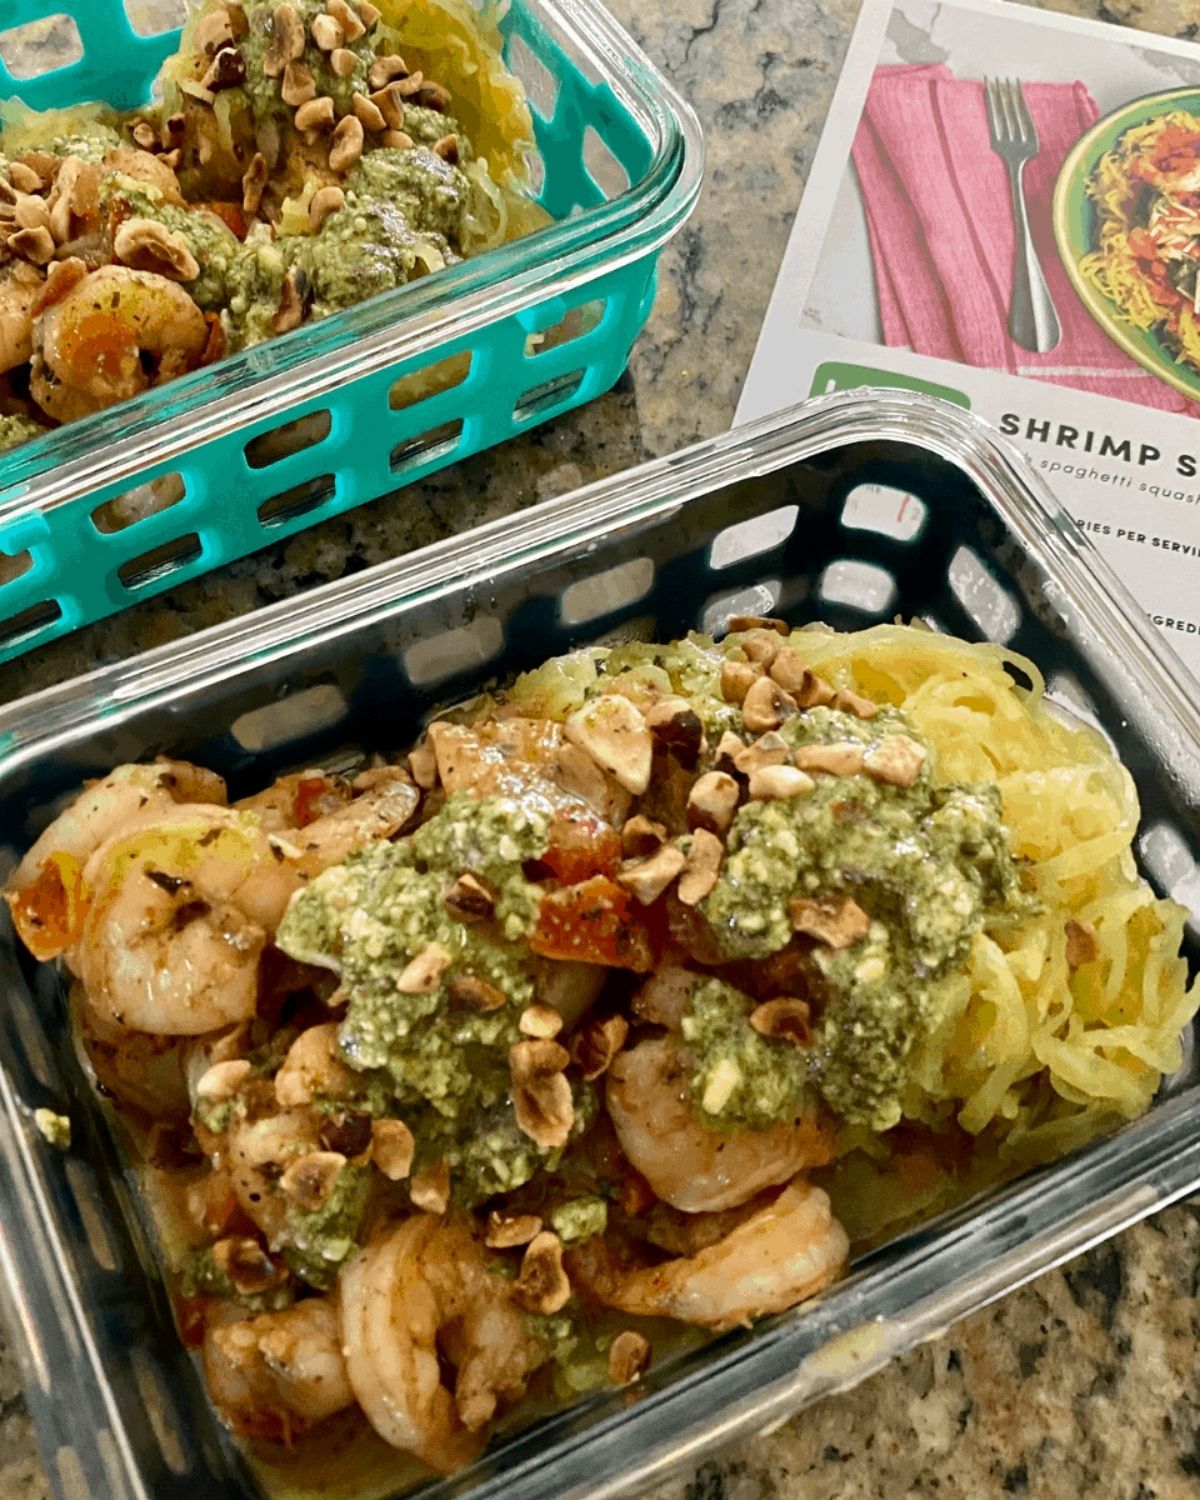 green chef shrimp scampi in a meal prep container